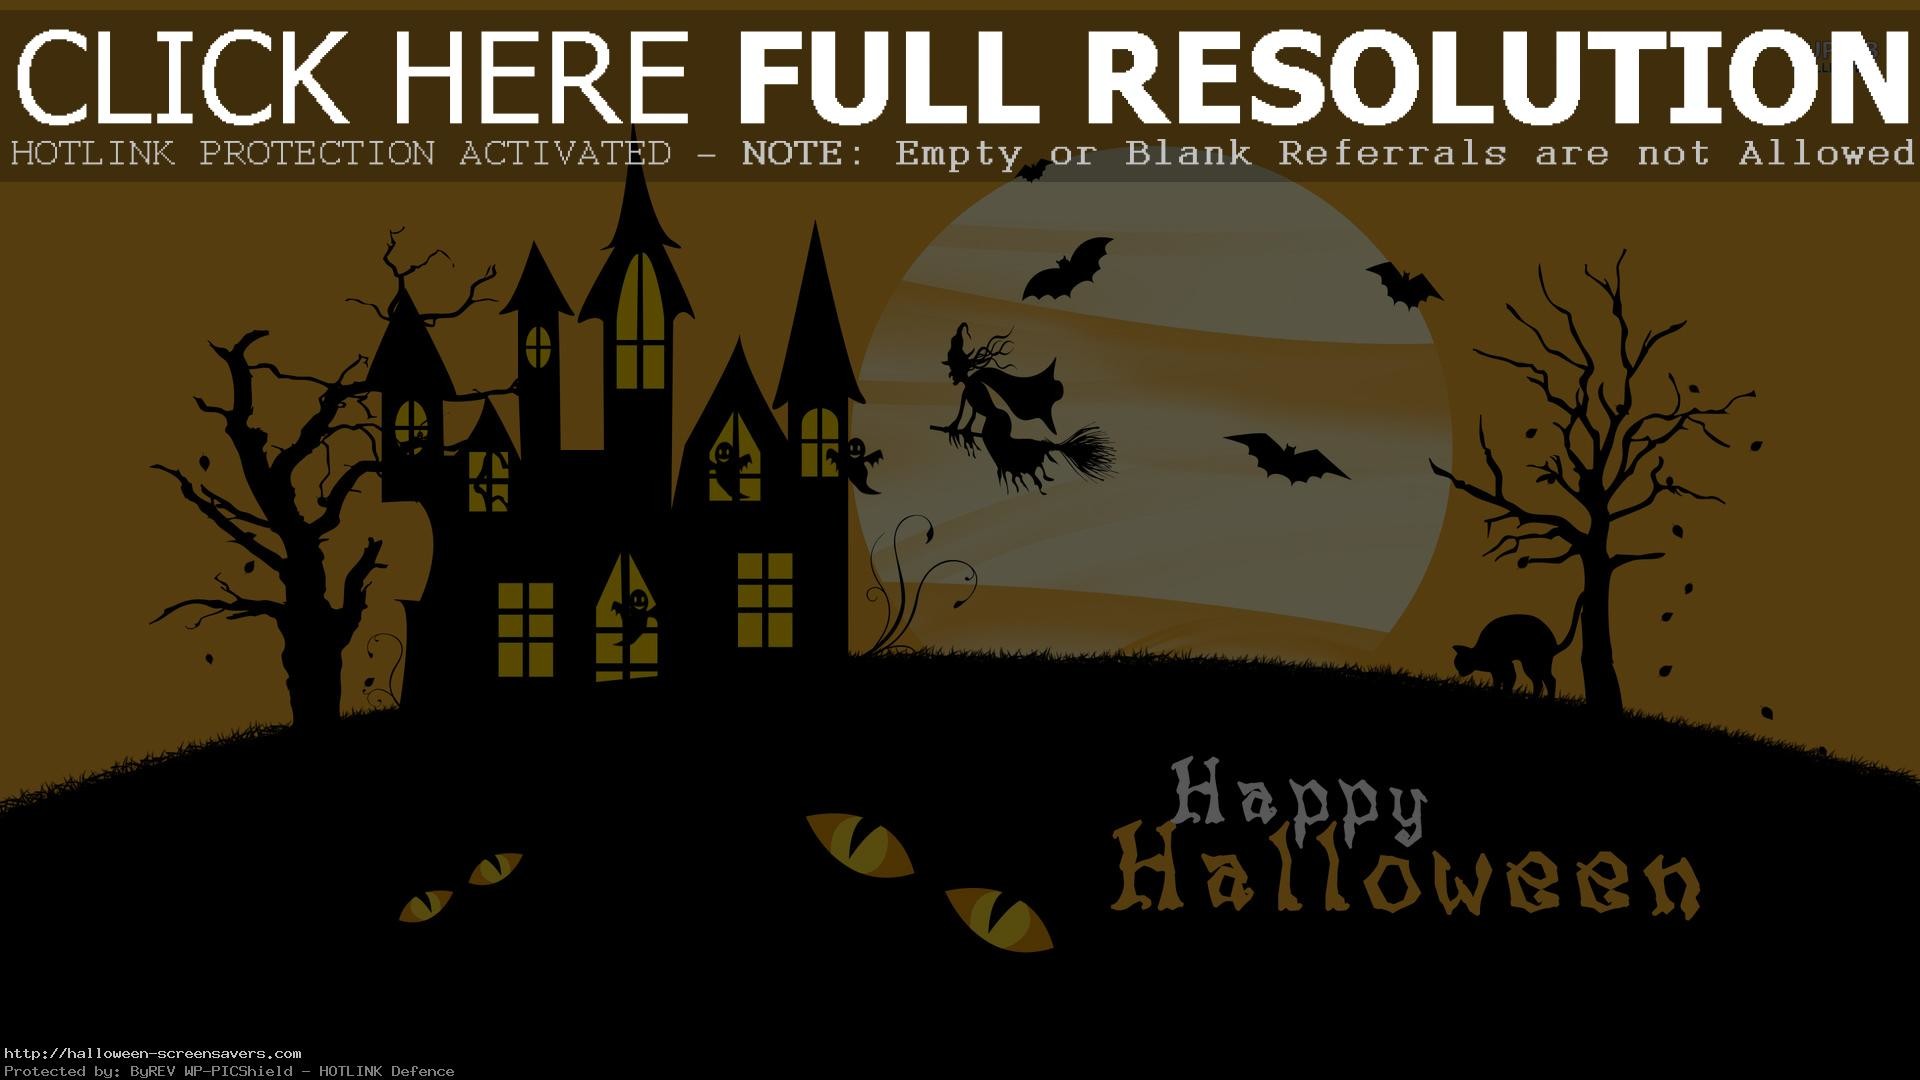 1920x1080 75+ Happy Halloween Wallpapers For Mobile, Desktop, iPhone | Happy Halloween  2018 Images, Quotes, Wishes, Pictures